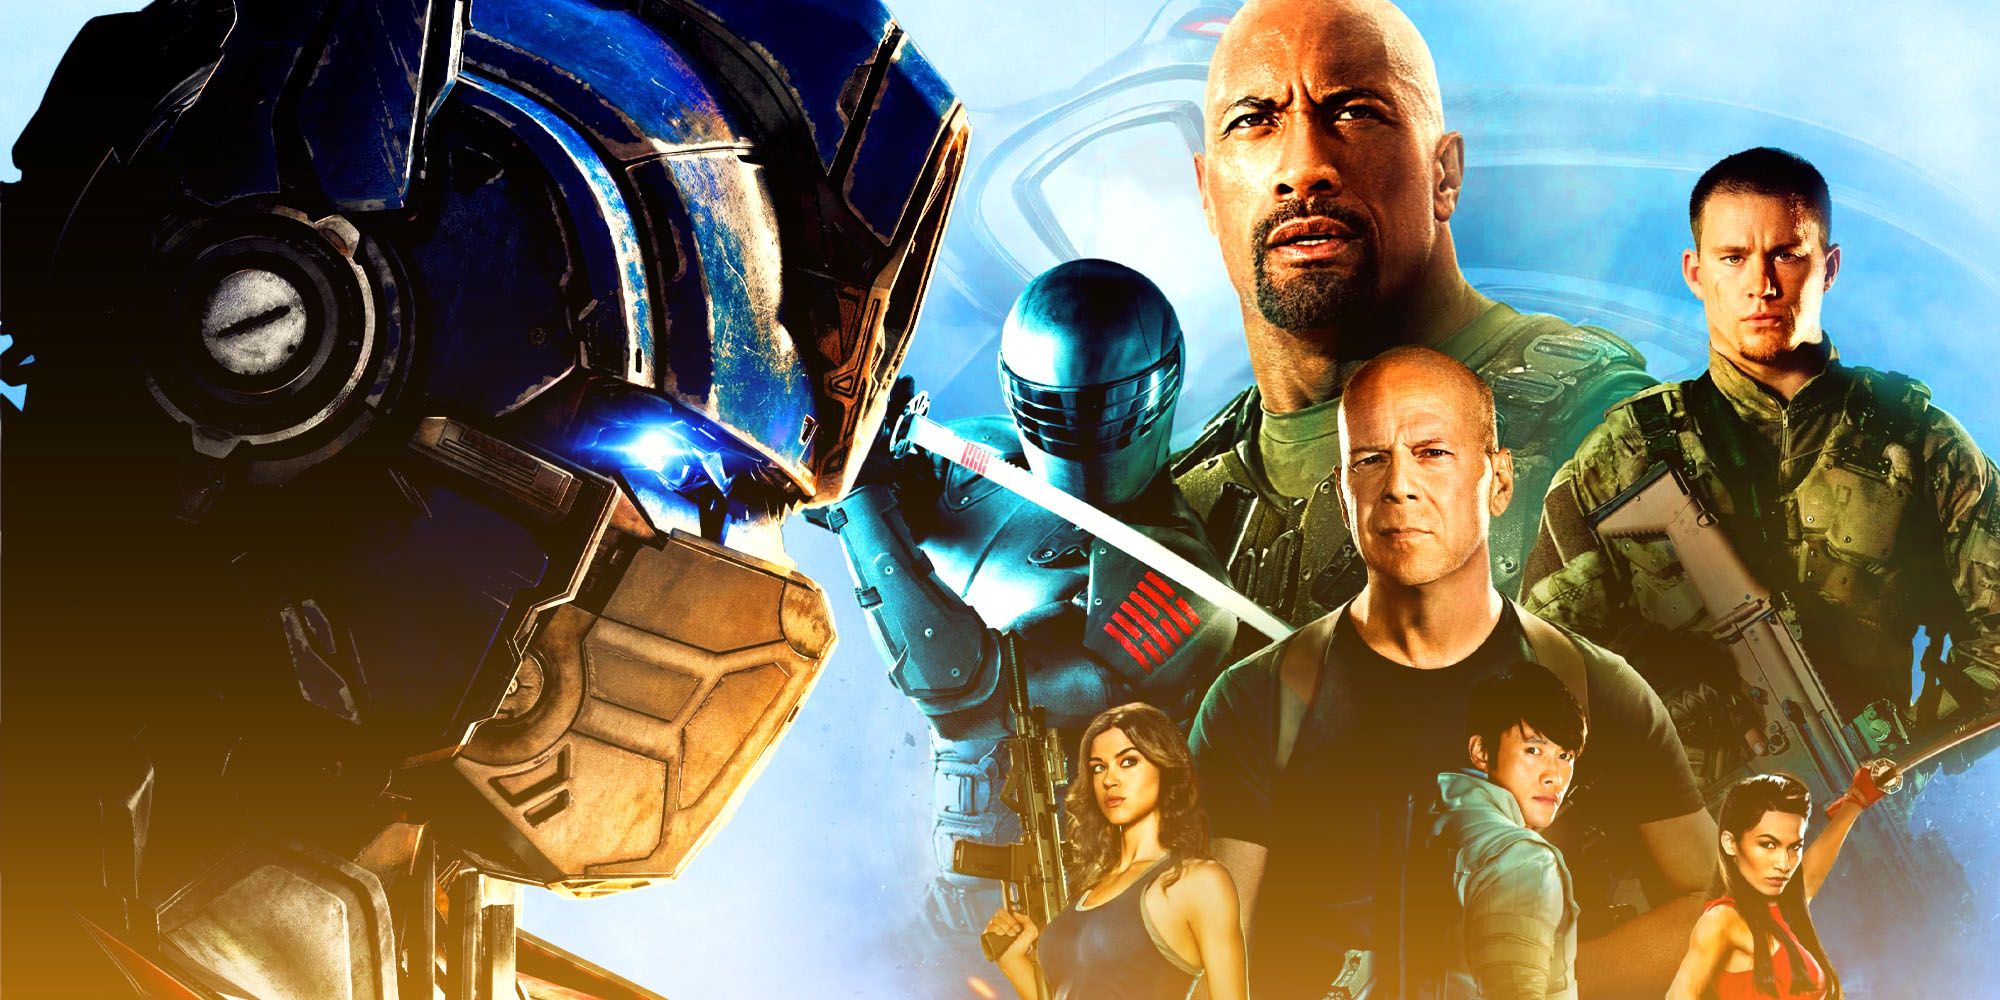 Transformers: Rise of the Beasts’ G.I. Joe Crossover Makes A 36 Year Dream Come True